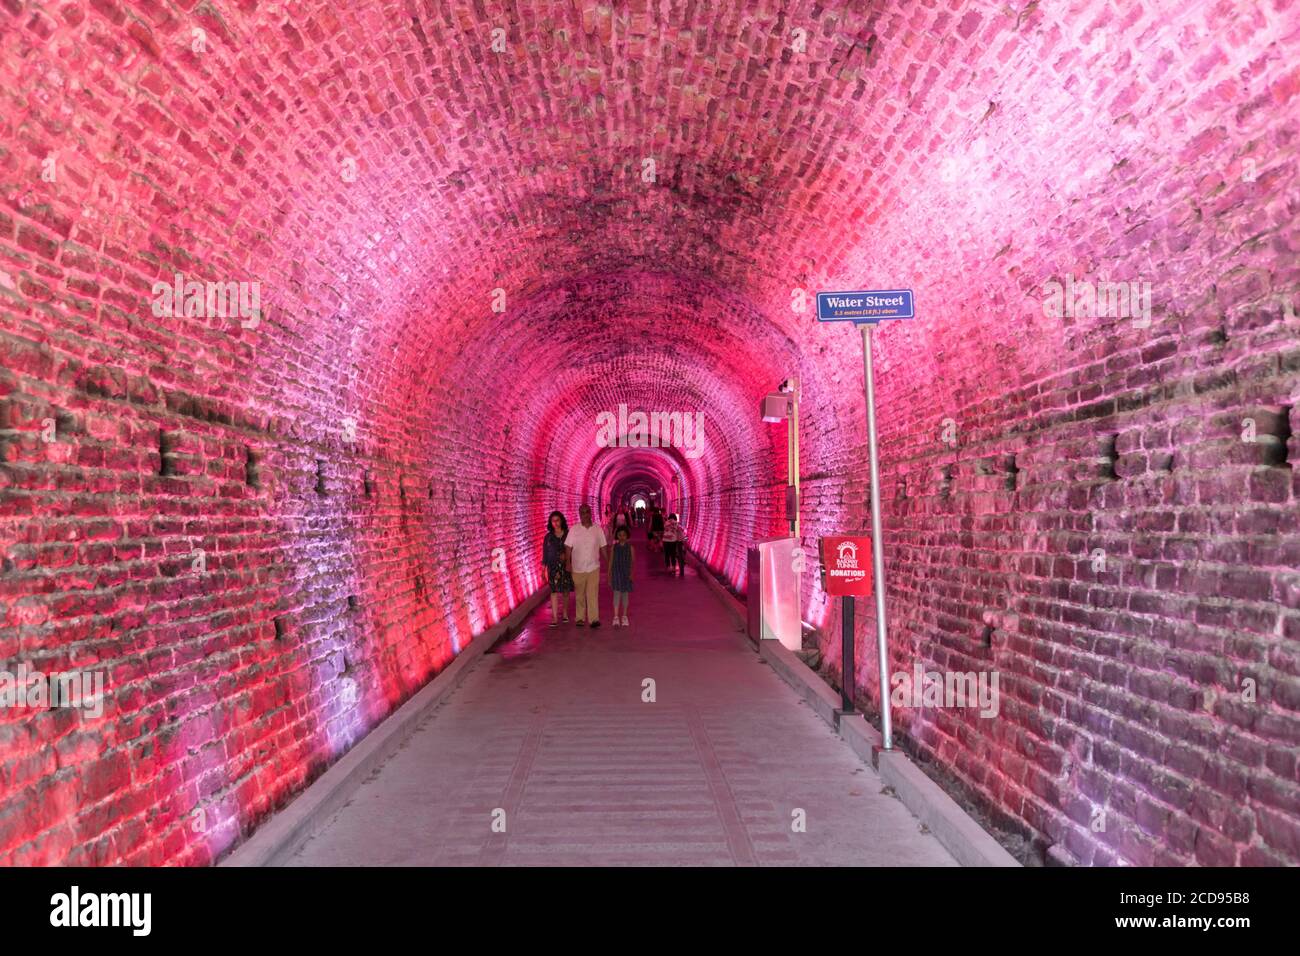 Canada, Ontario, Brockville along the St. Lawrence River, the Water Street pedestrian tunnel Stock Photo